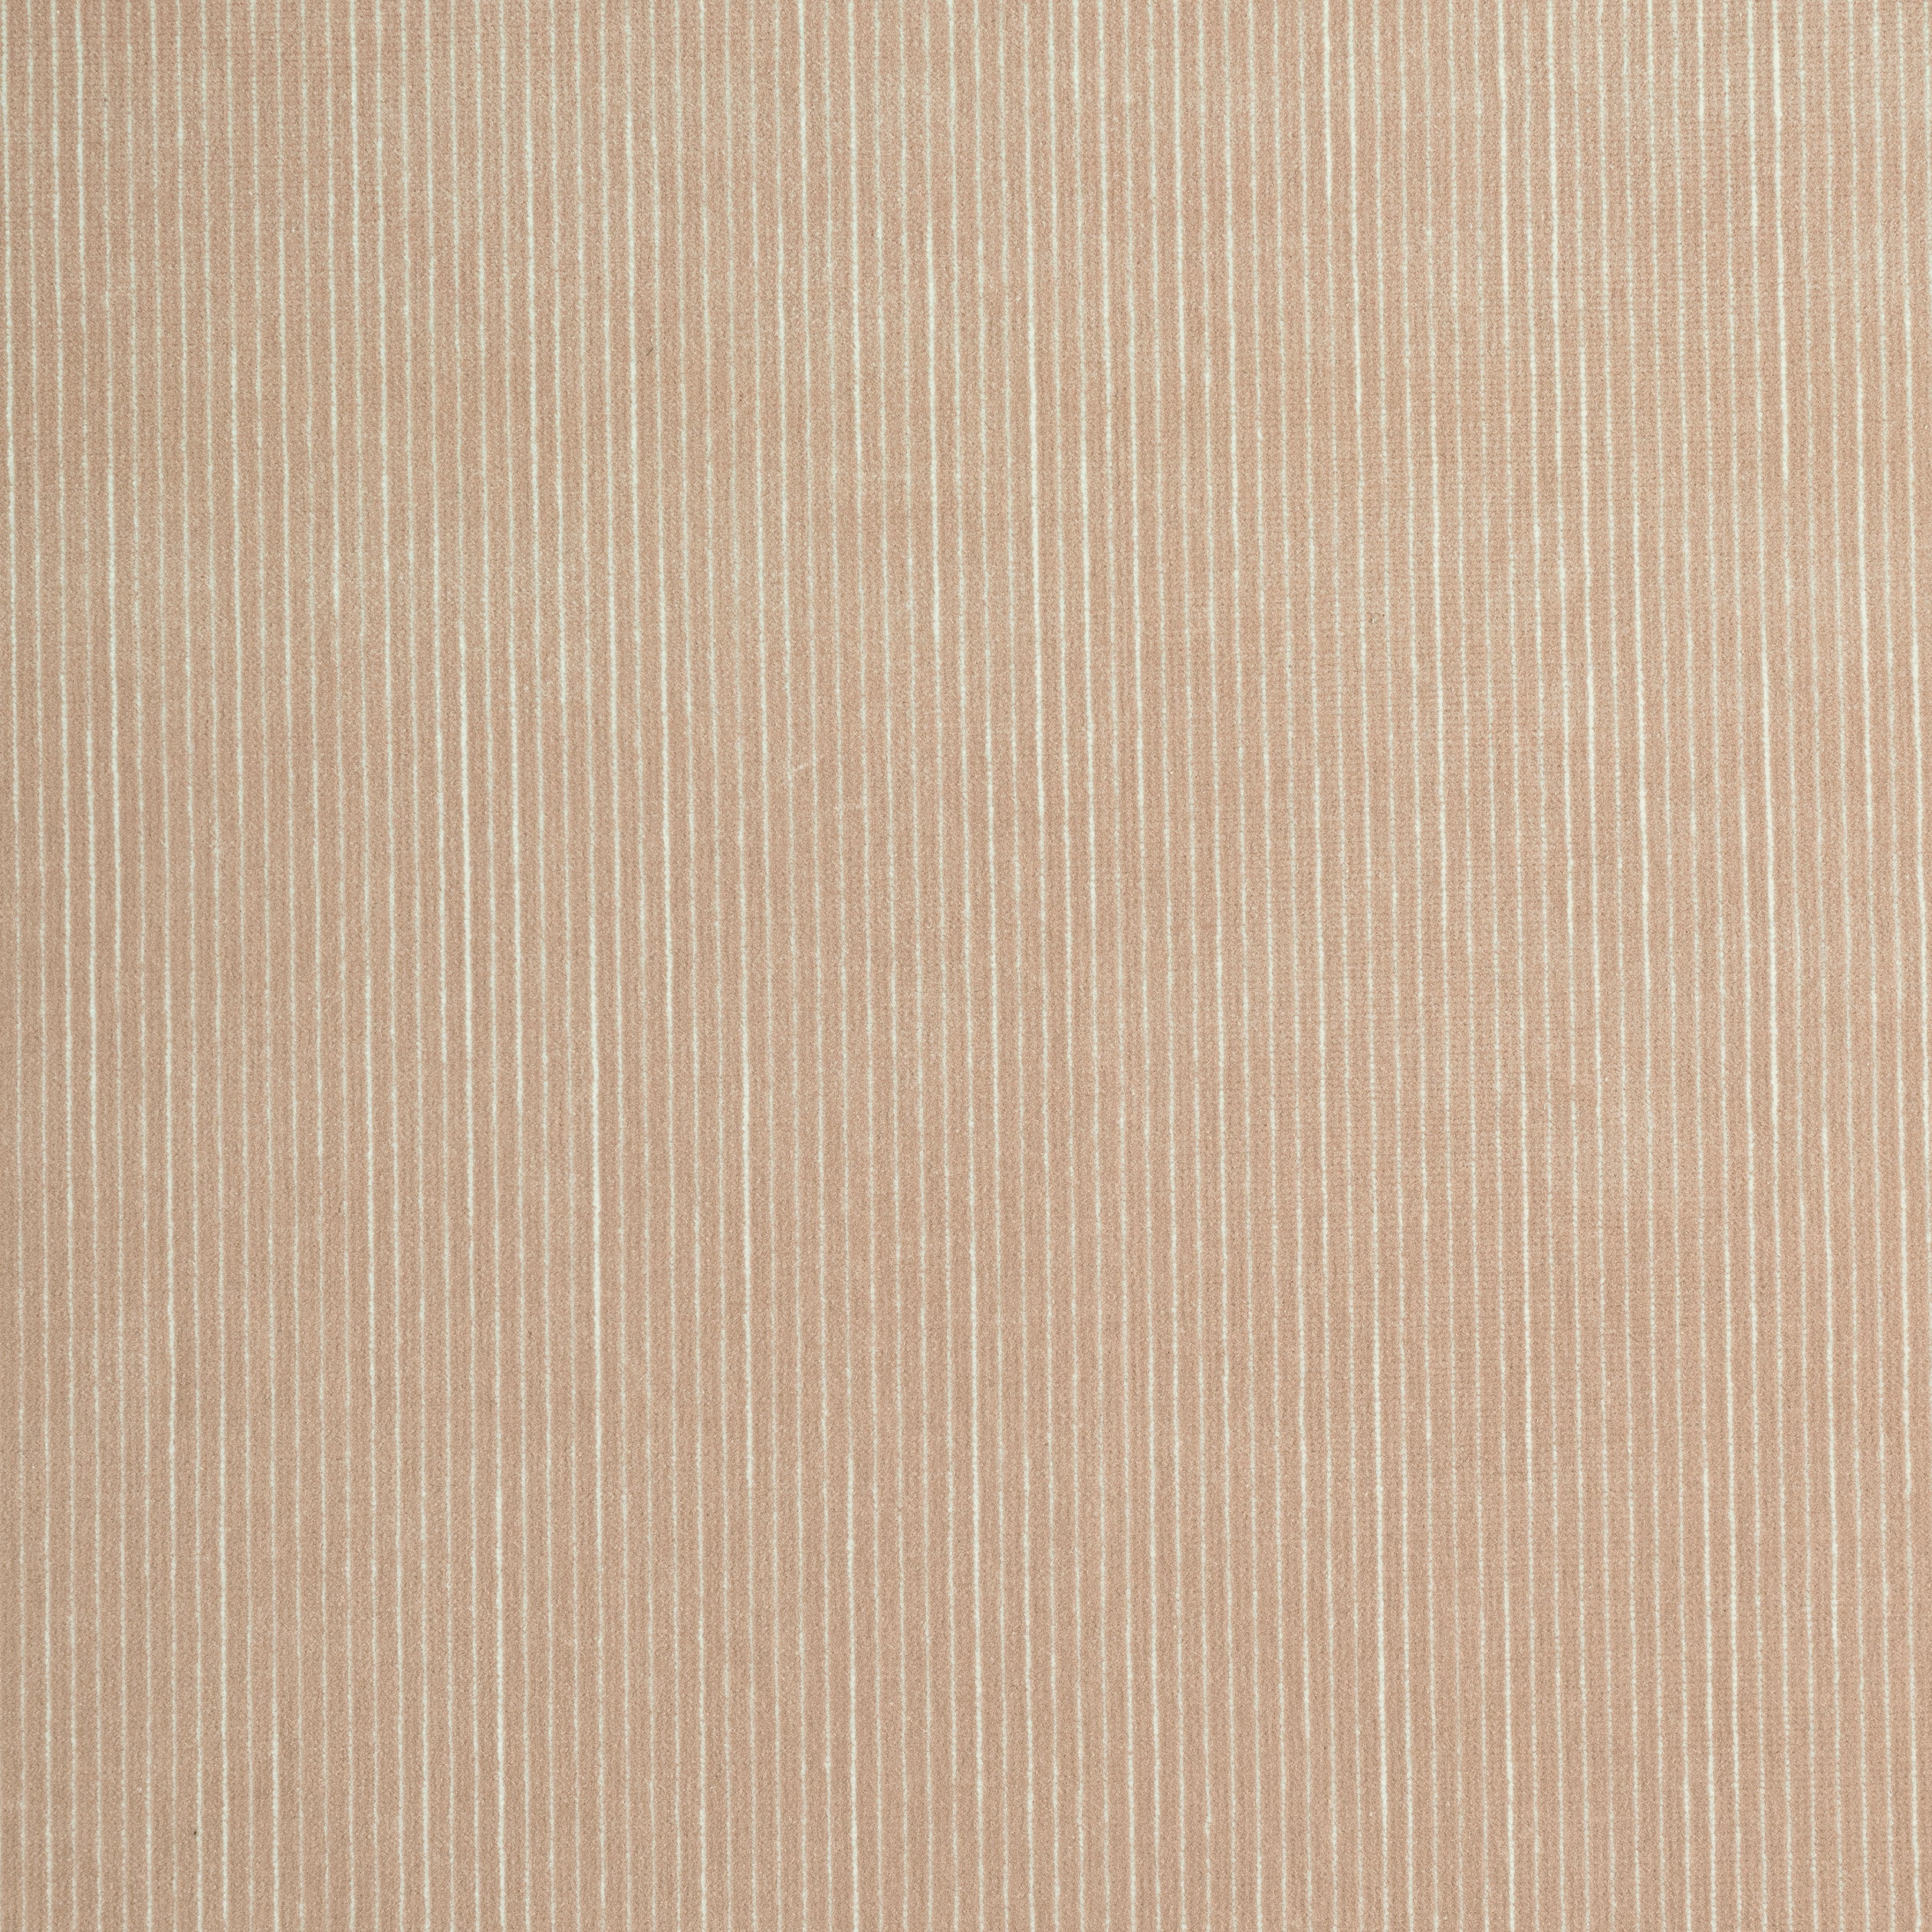 Fino Velvet fabric in cashmere color - pattern number W8149 - by Thibaut in the Sereno collection